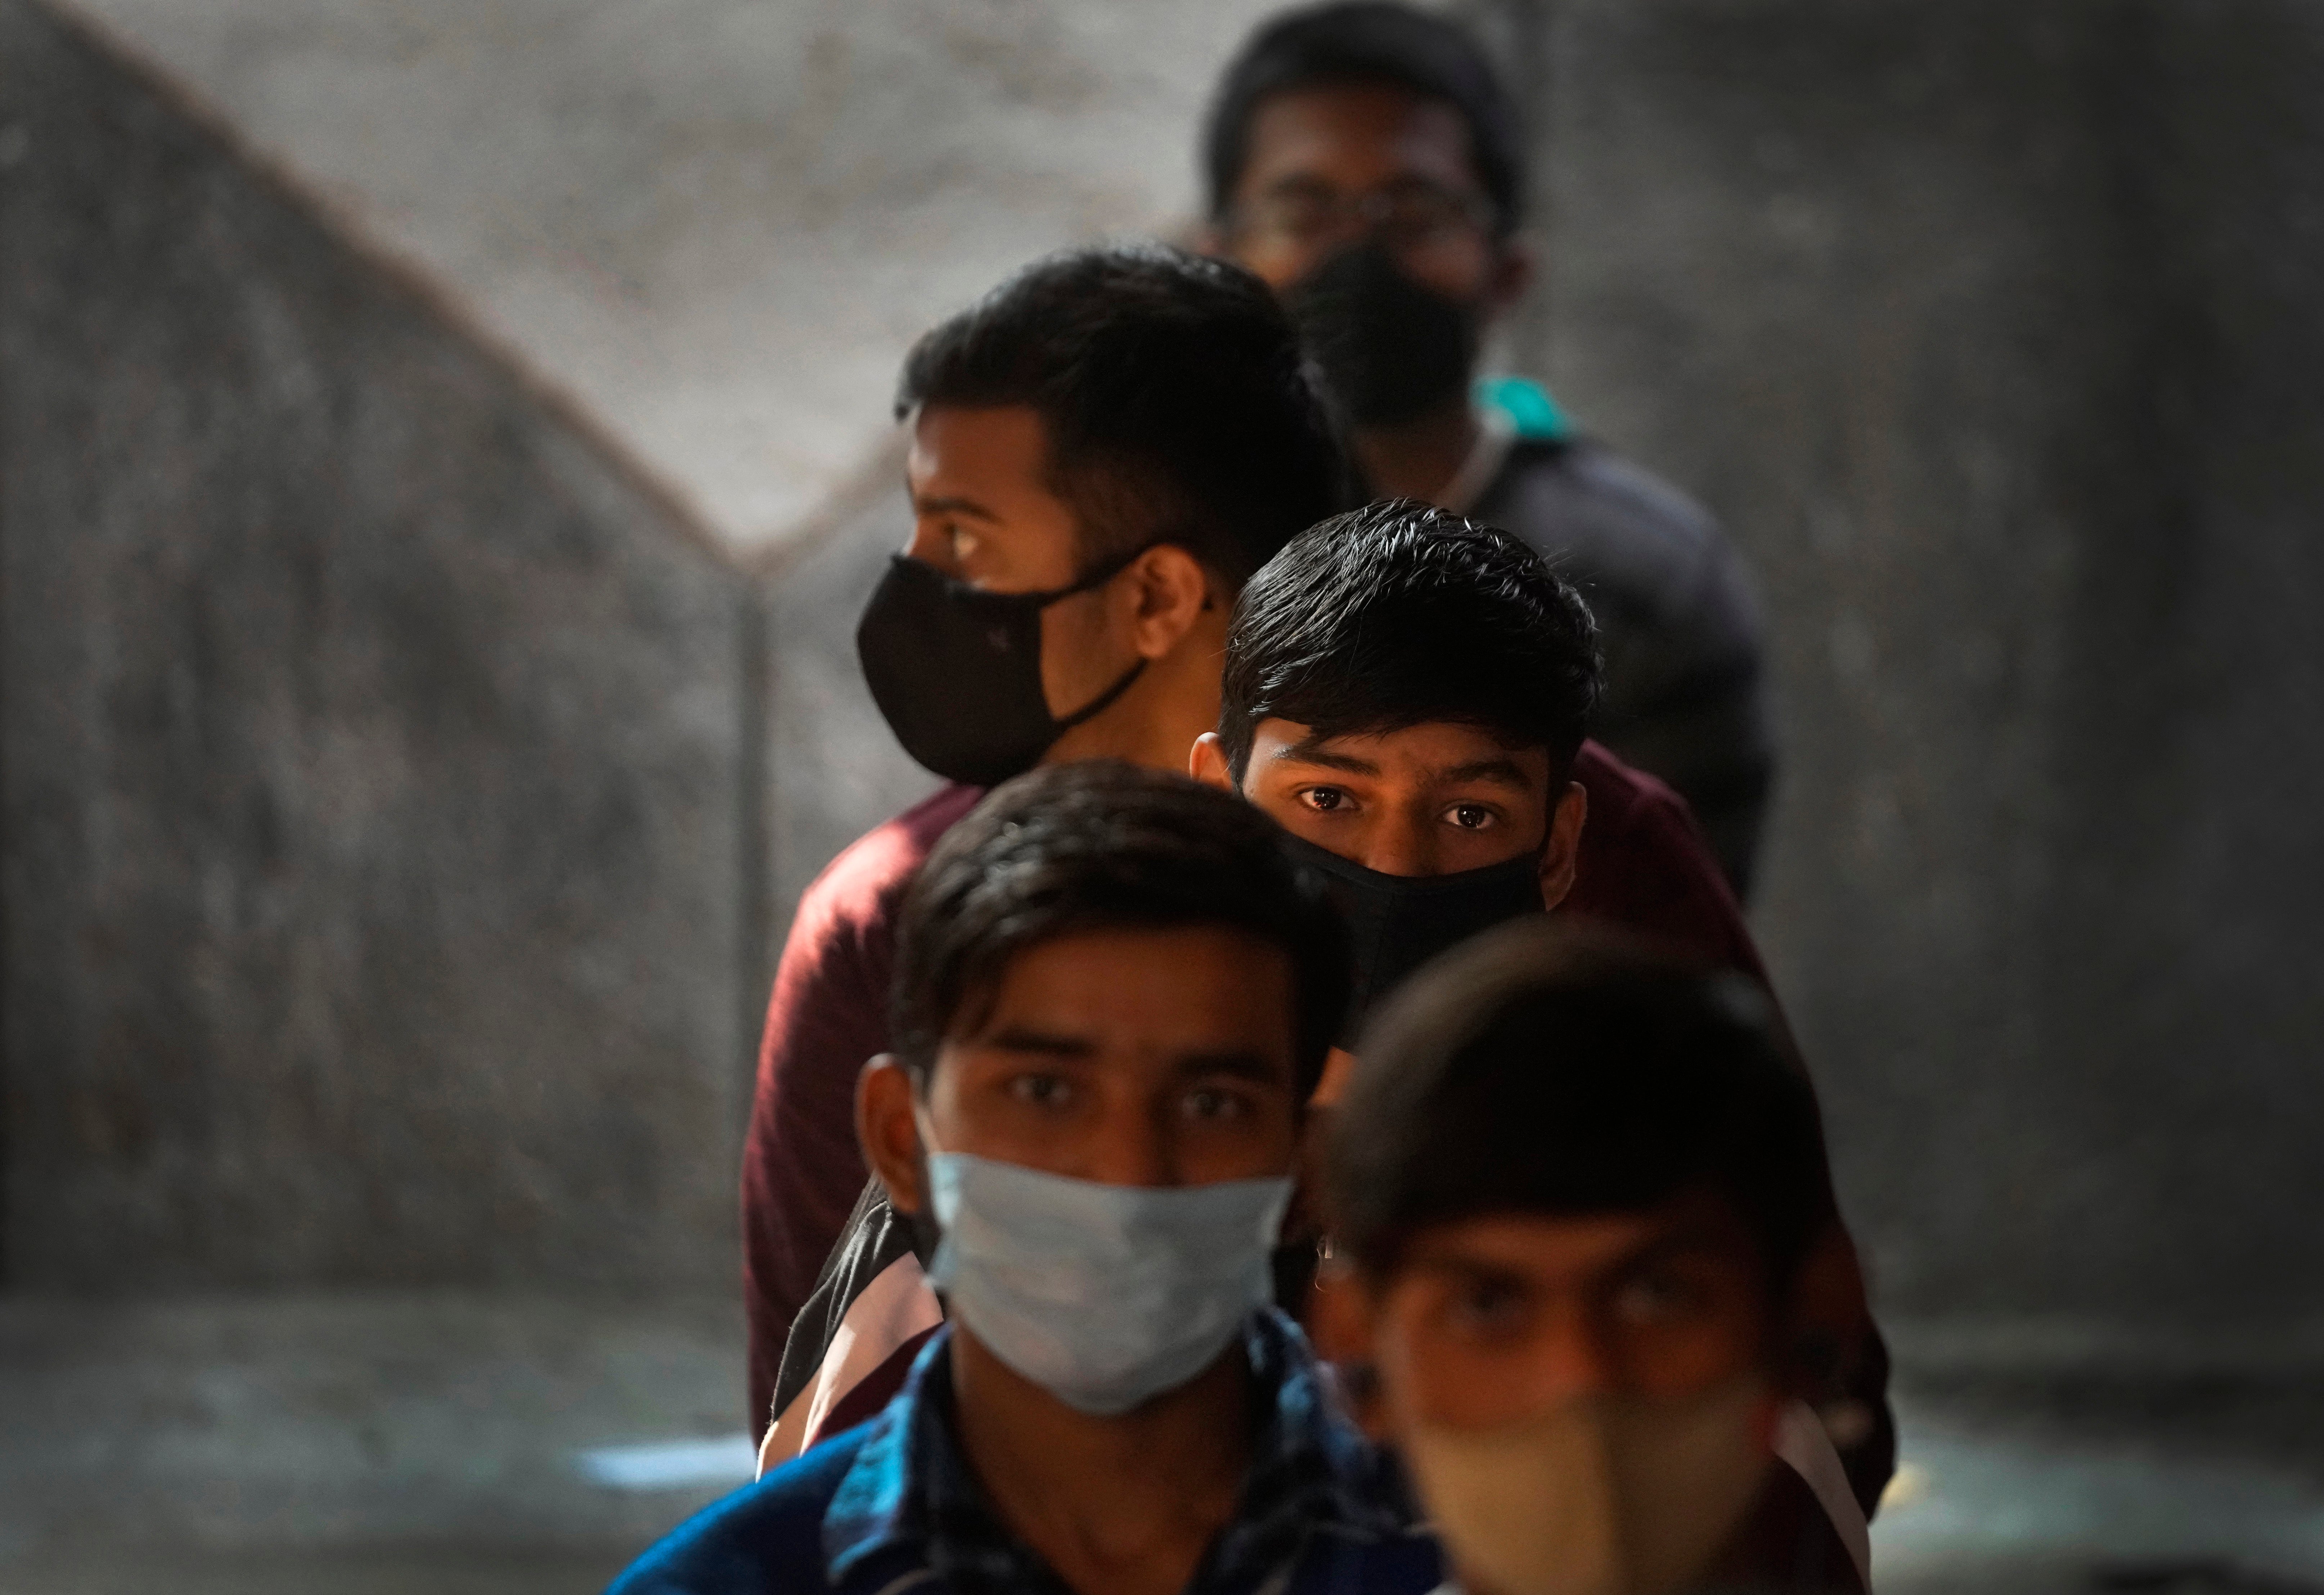 Indian health authorities began vaccinating teens from 3 January